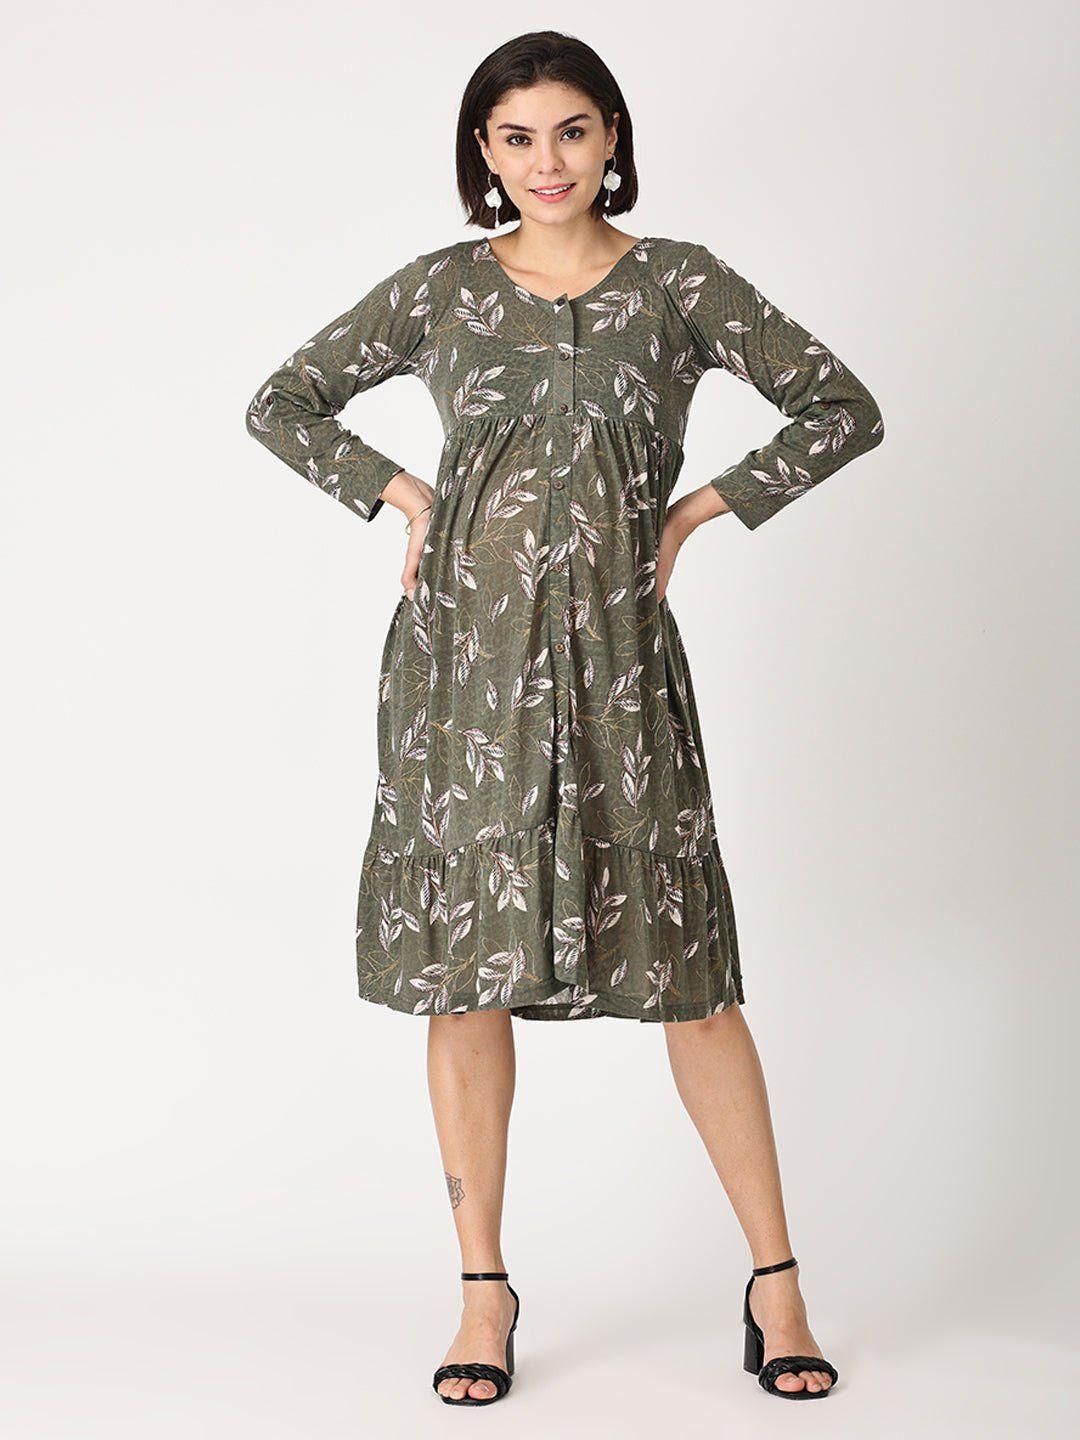 the mom store olive green & off white floral printed cotton maternity a-line dress